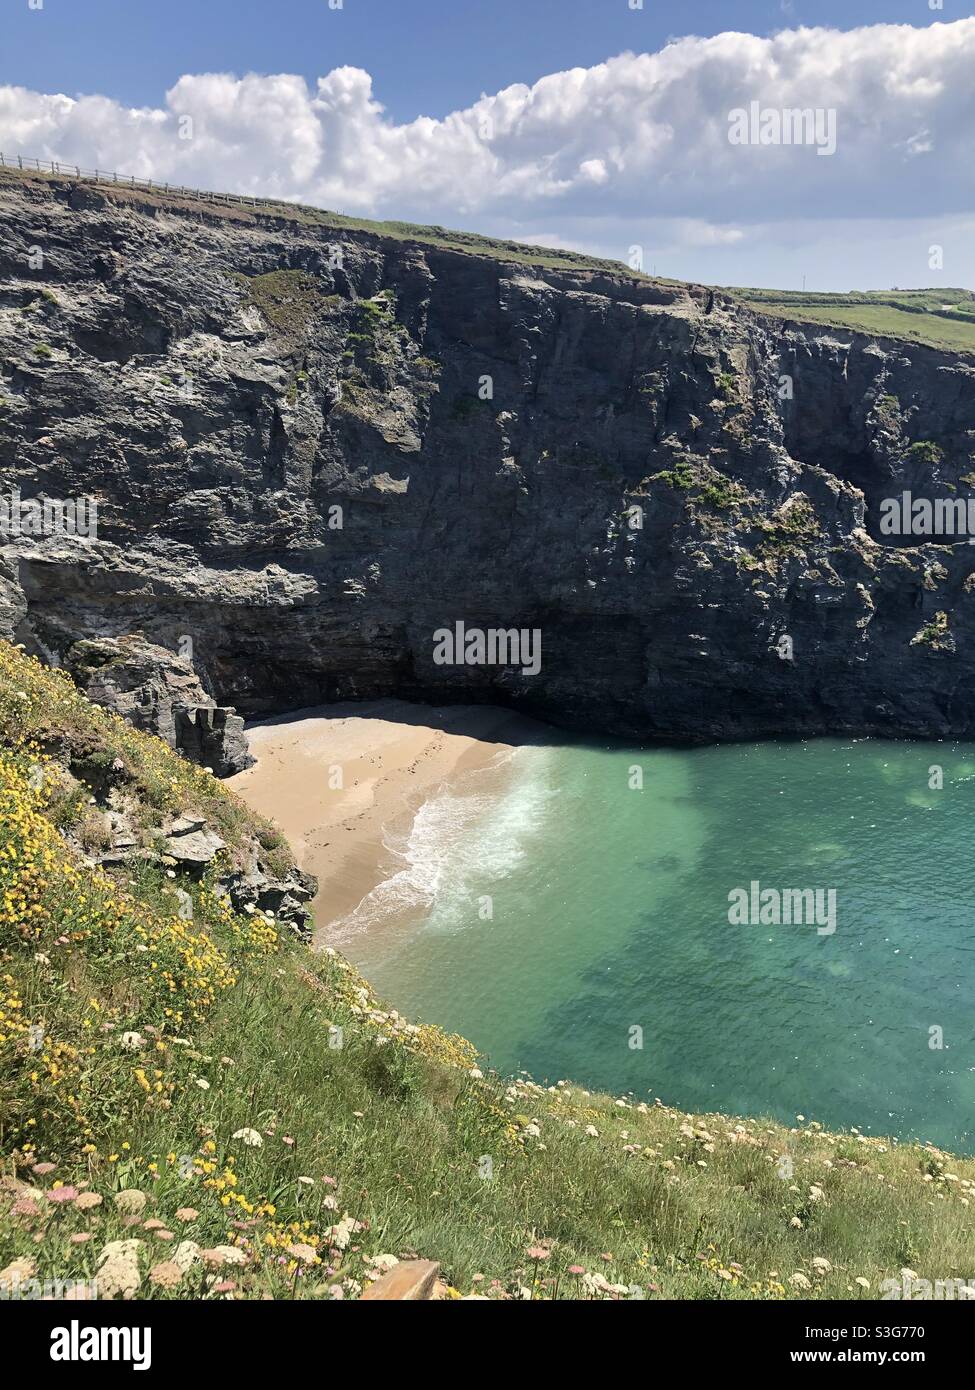 Hidden beach in Cornwall with turquoise sea Stock Photo